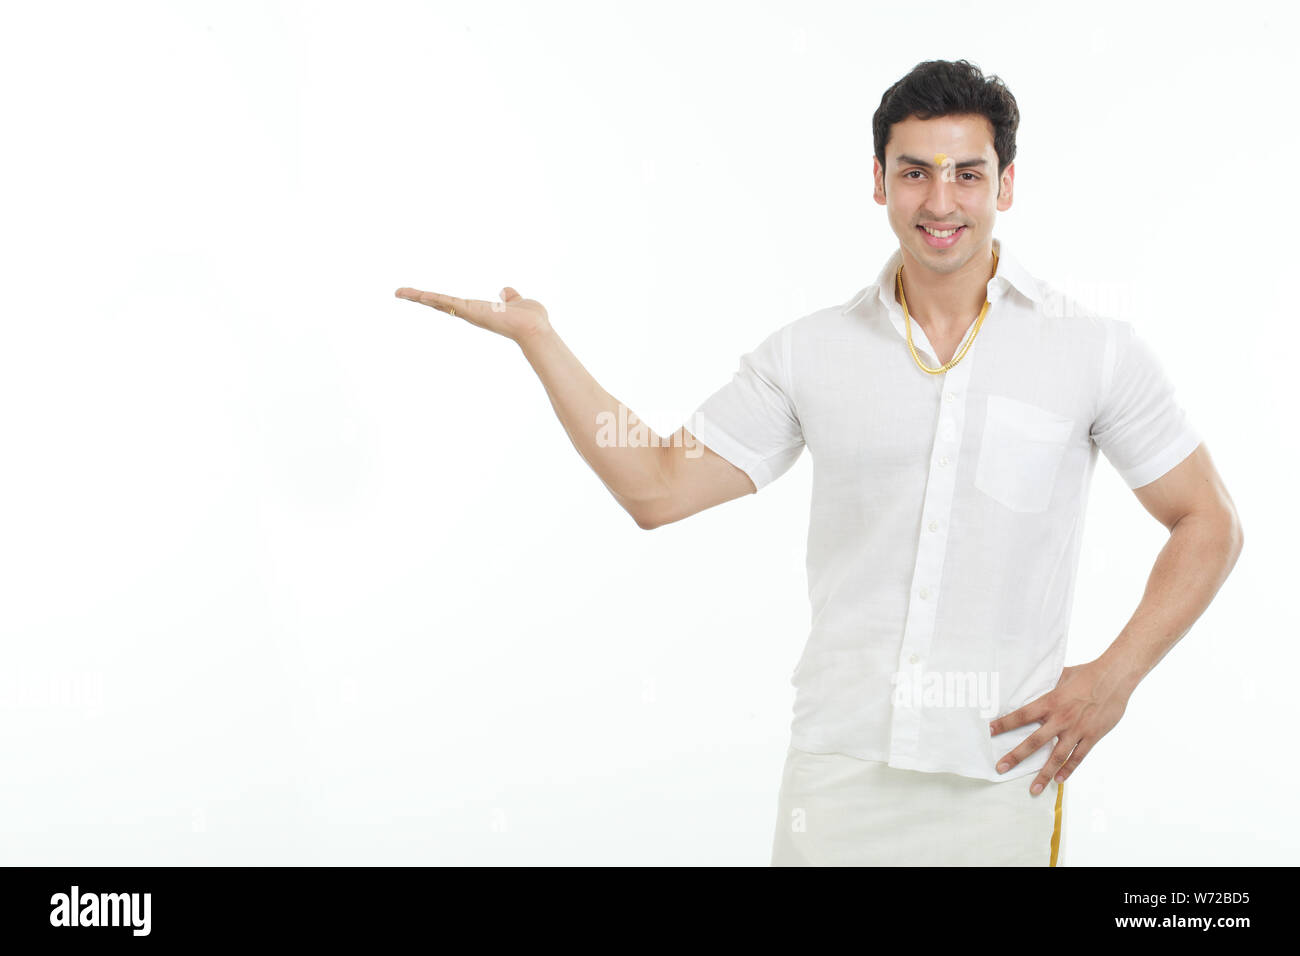 South Indian man smiling and gesturing Stock Photo